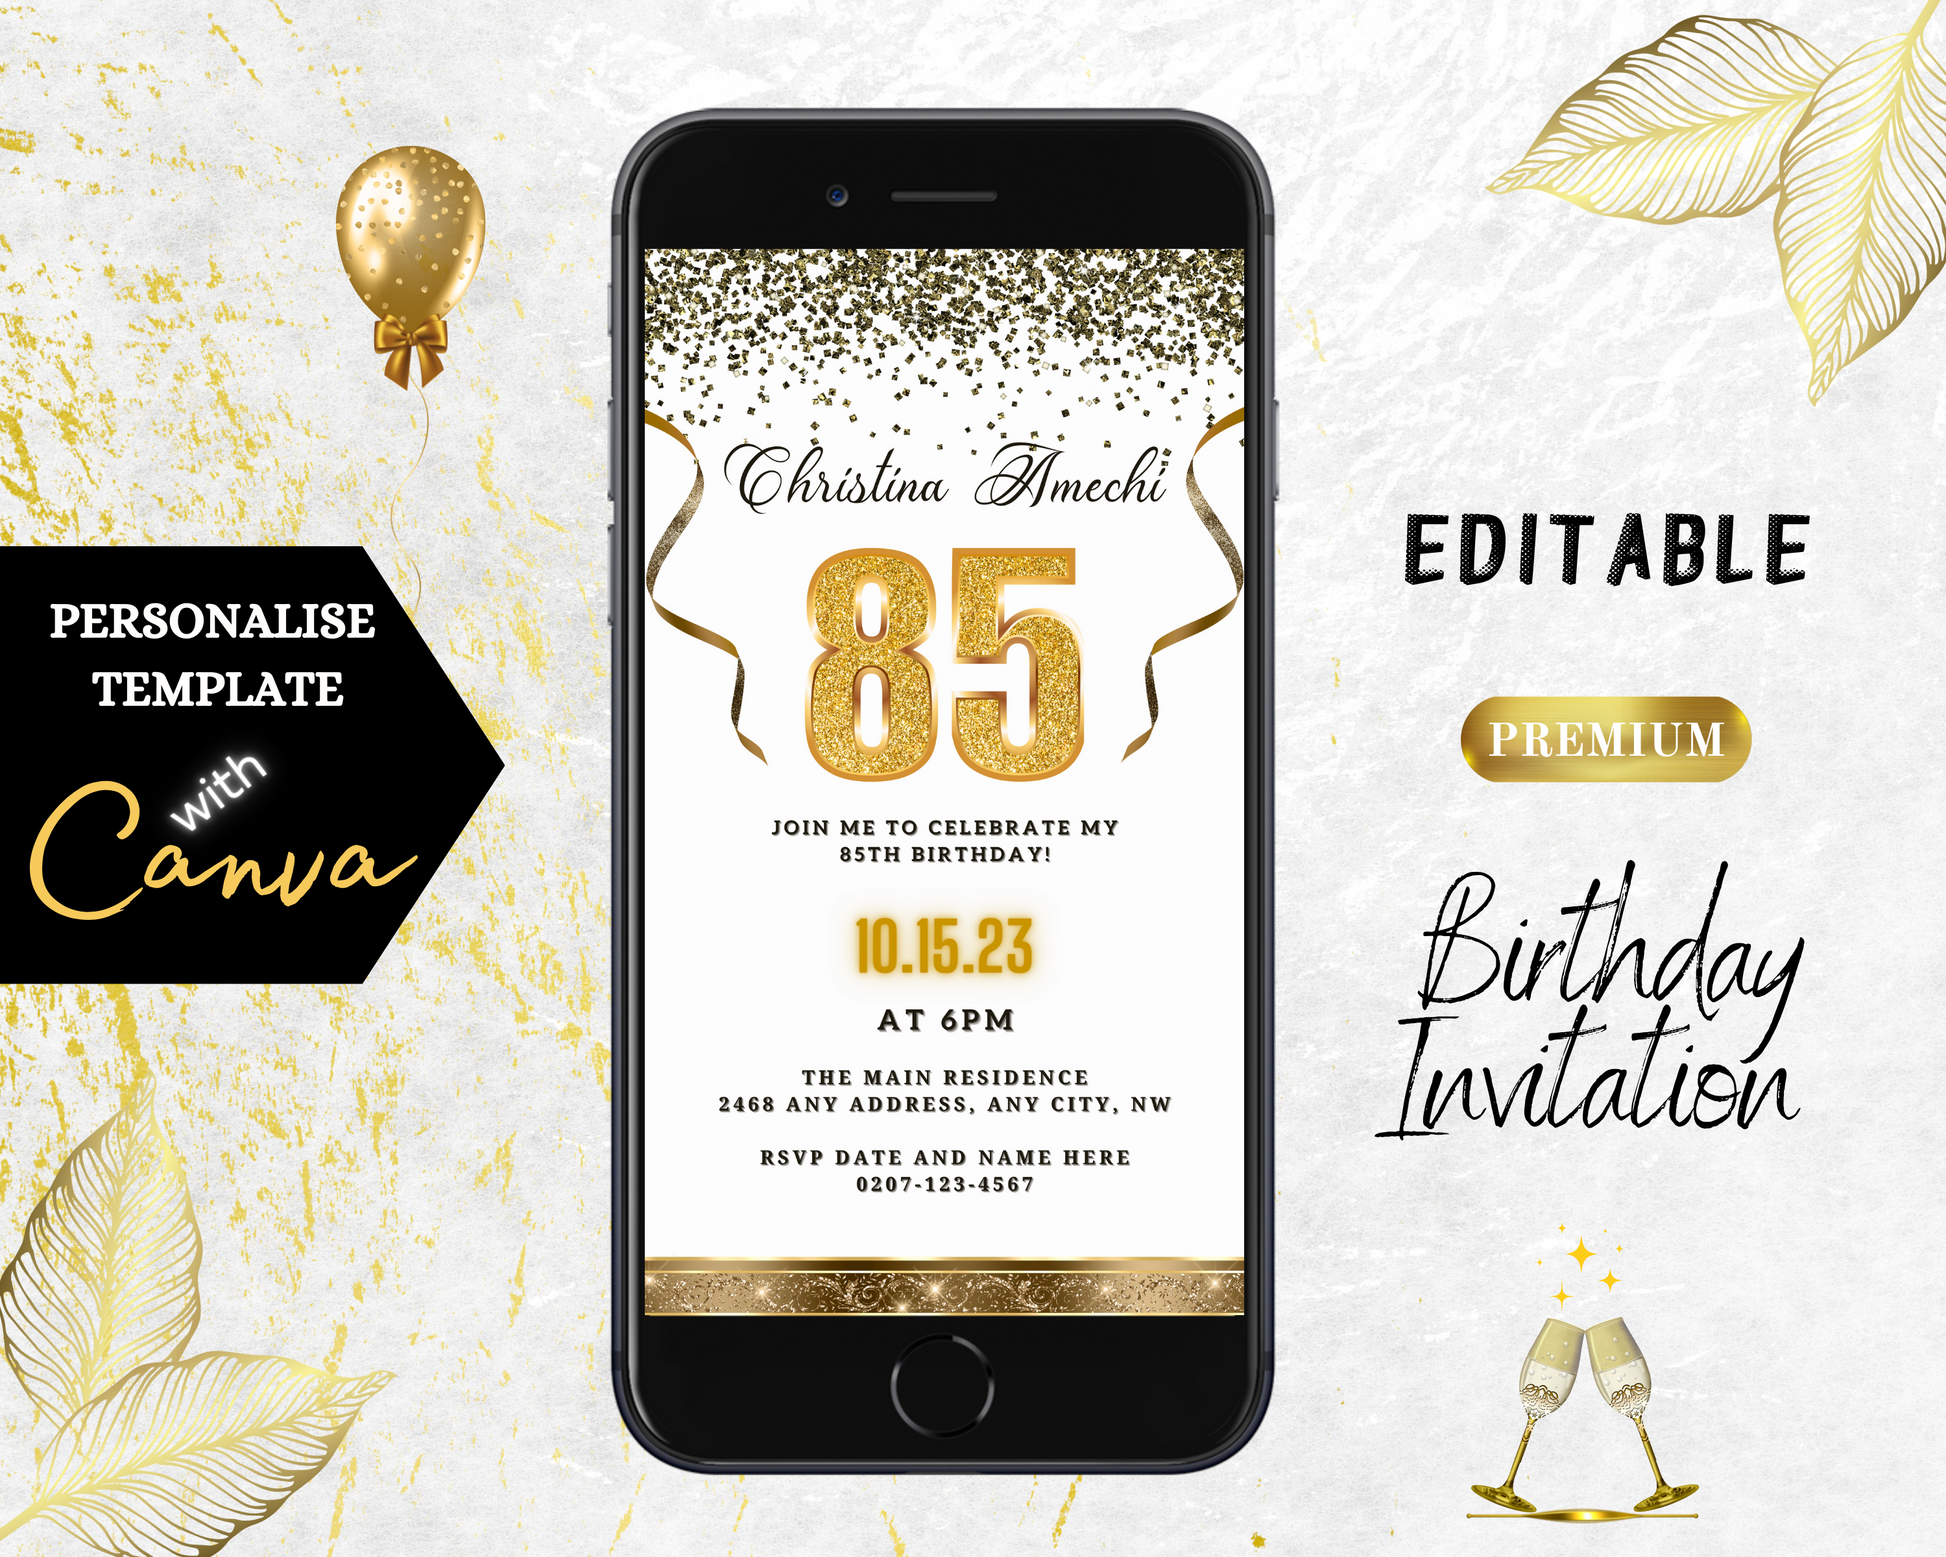 White Gold Confetti 85th Birthday Evite displayed on a smartphone screen, highlighting customizable text and design elements for a digital invitation template.